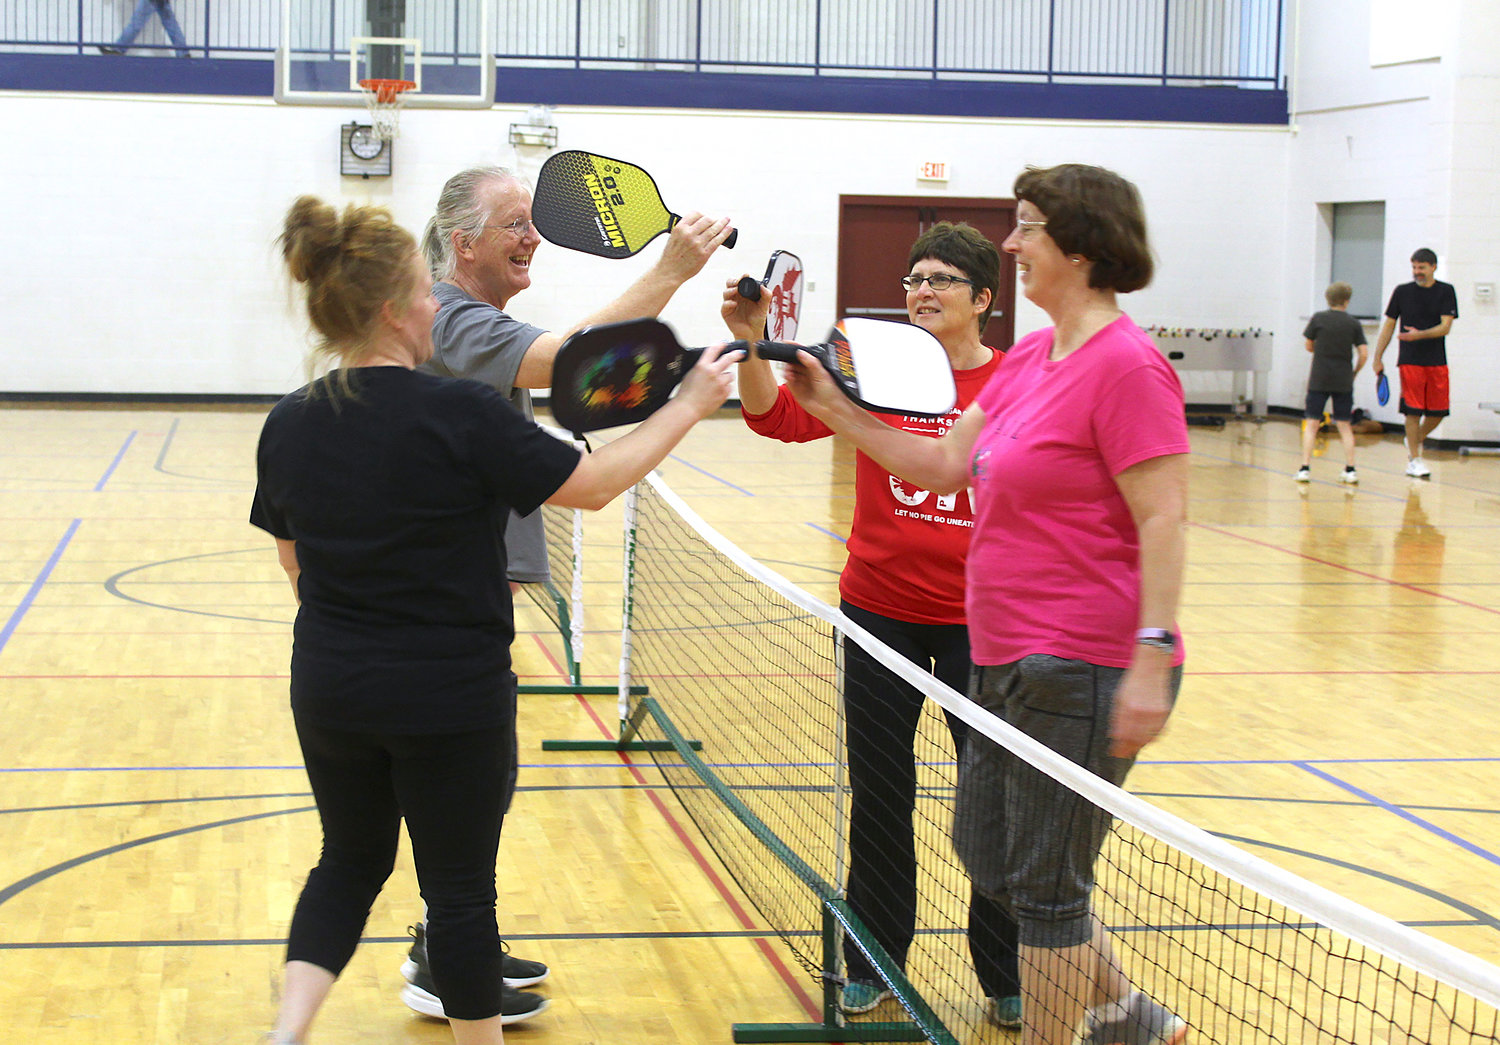 Pickleball enthusiasts Dominique Fruits, from left, Larry Clarke, Vicki Deer and Jean Kyle congratulate one another after a successful game of Pickleball at the Crawfordsville Parks and Recreation building.